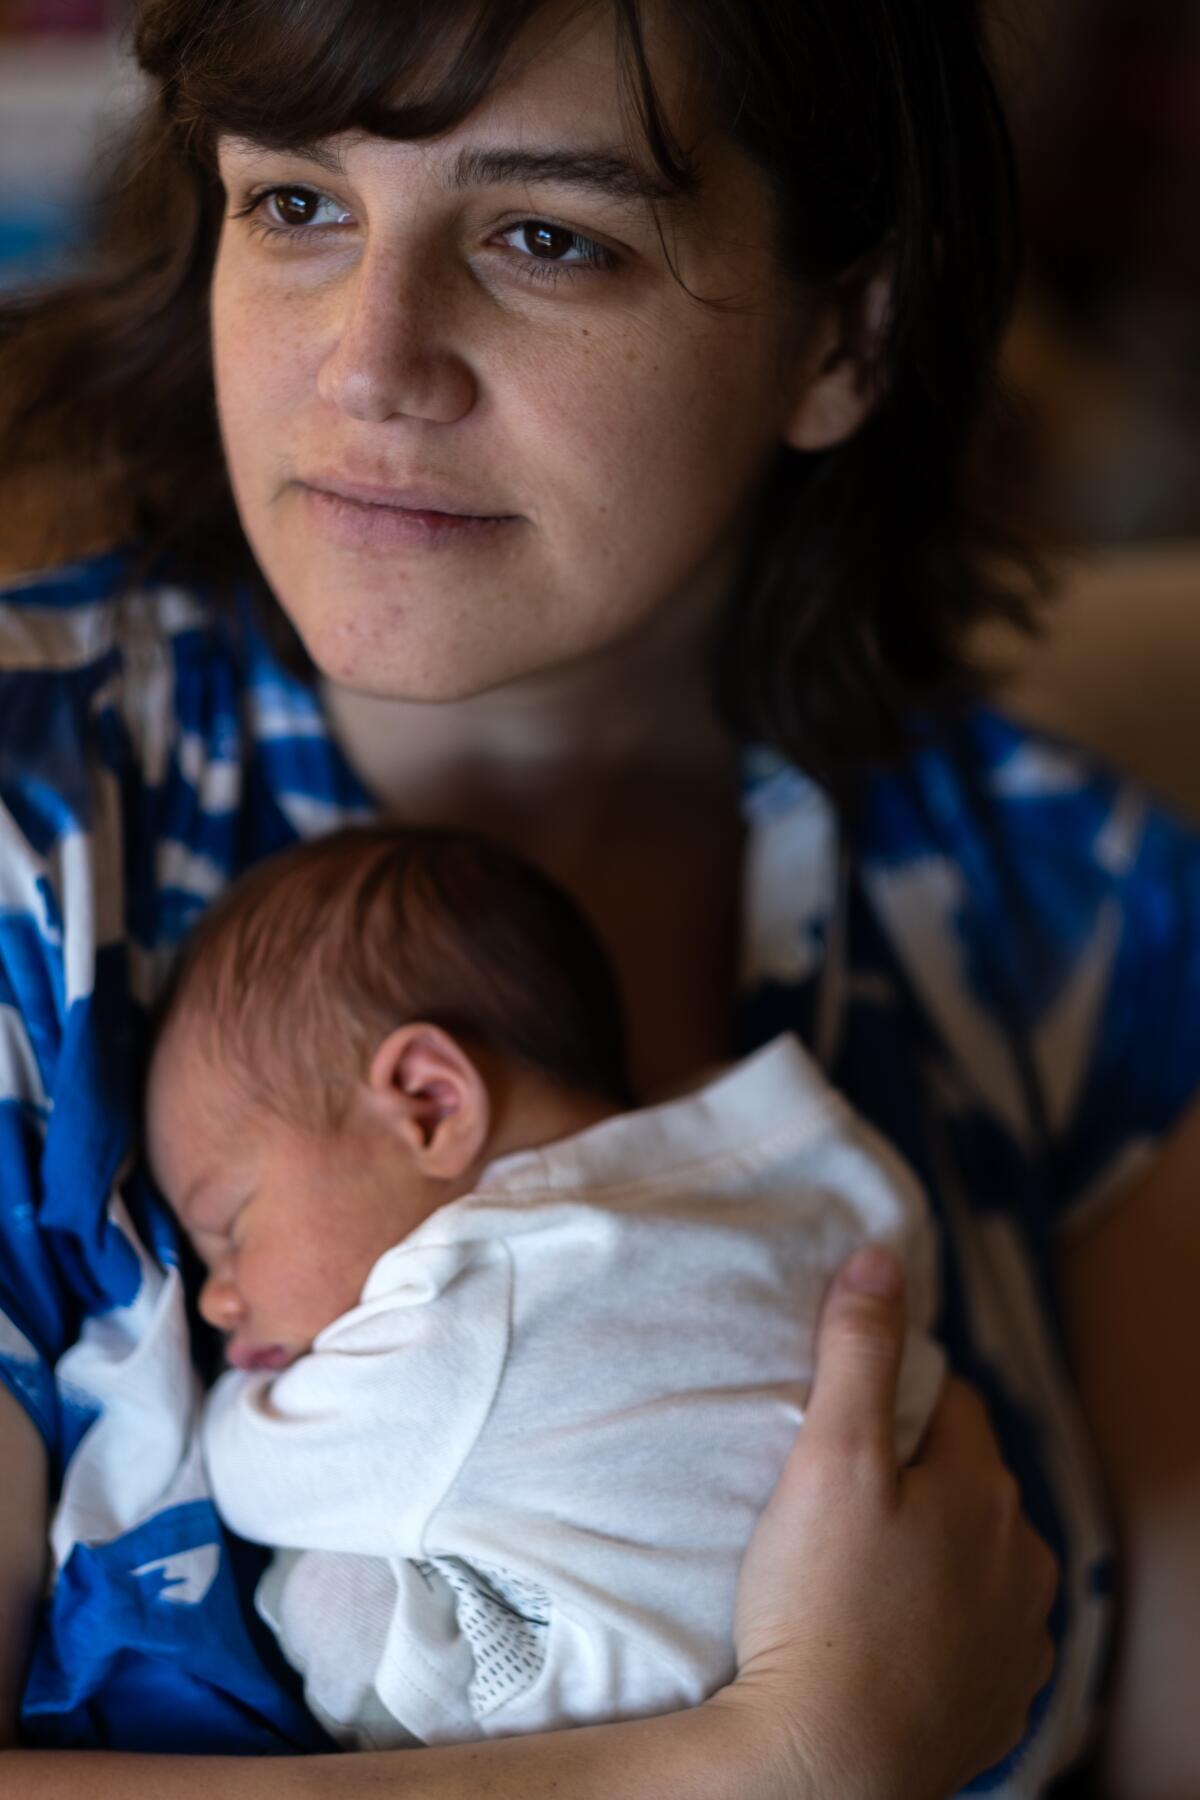 Megan Costello holds her infant son.